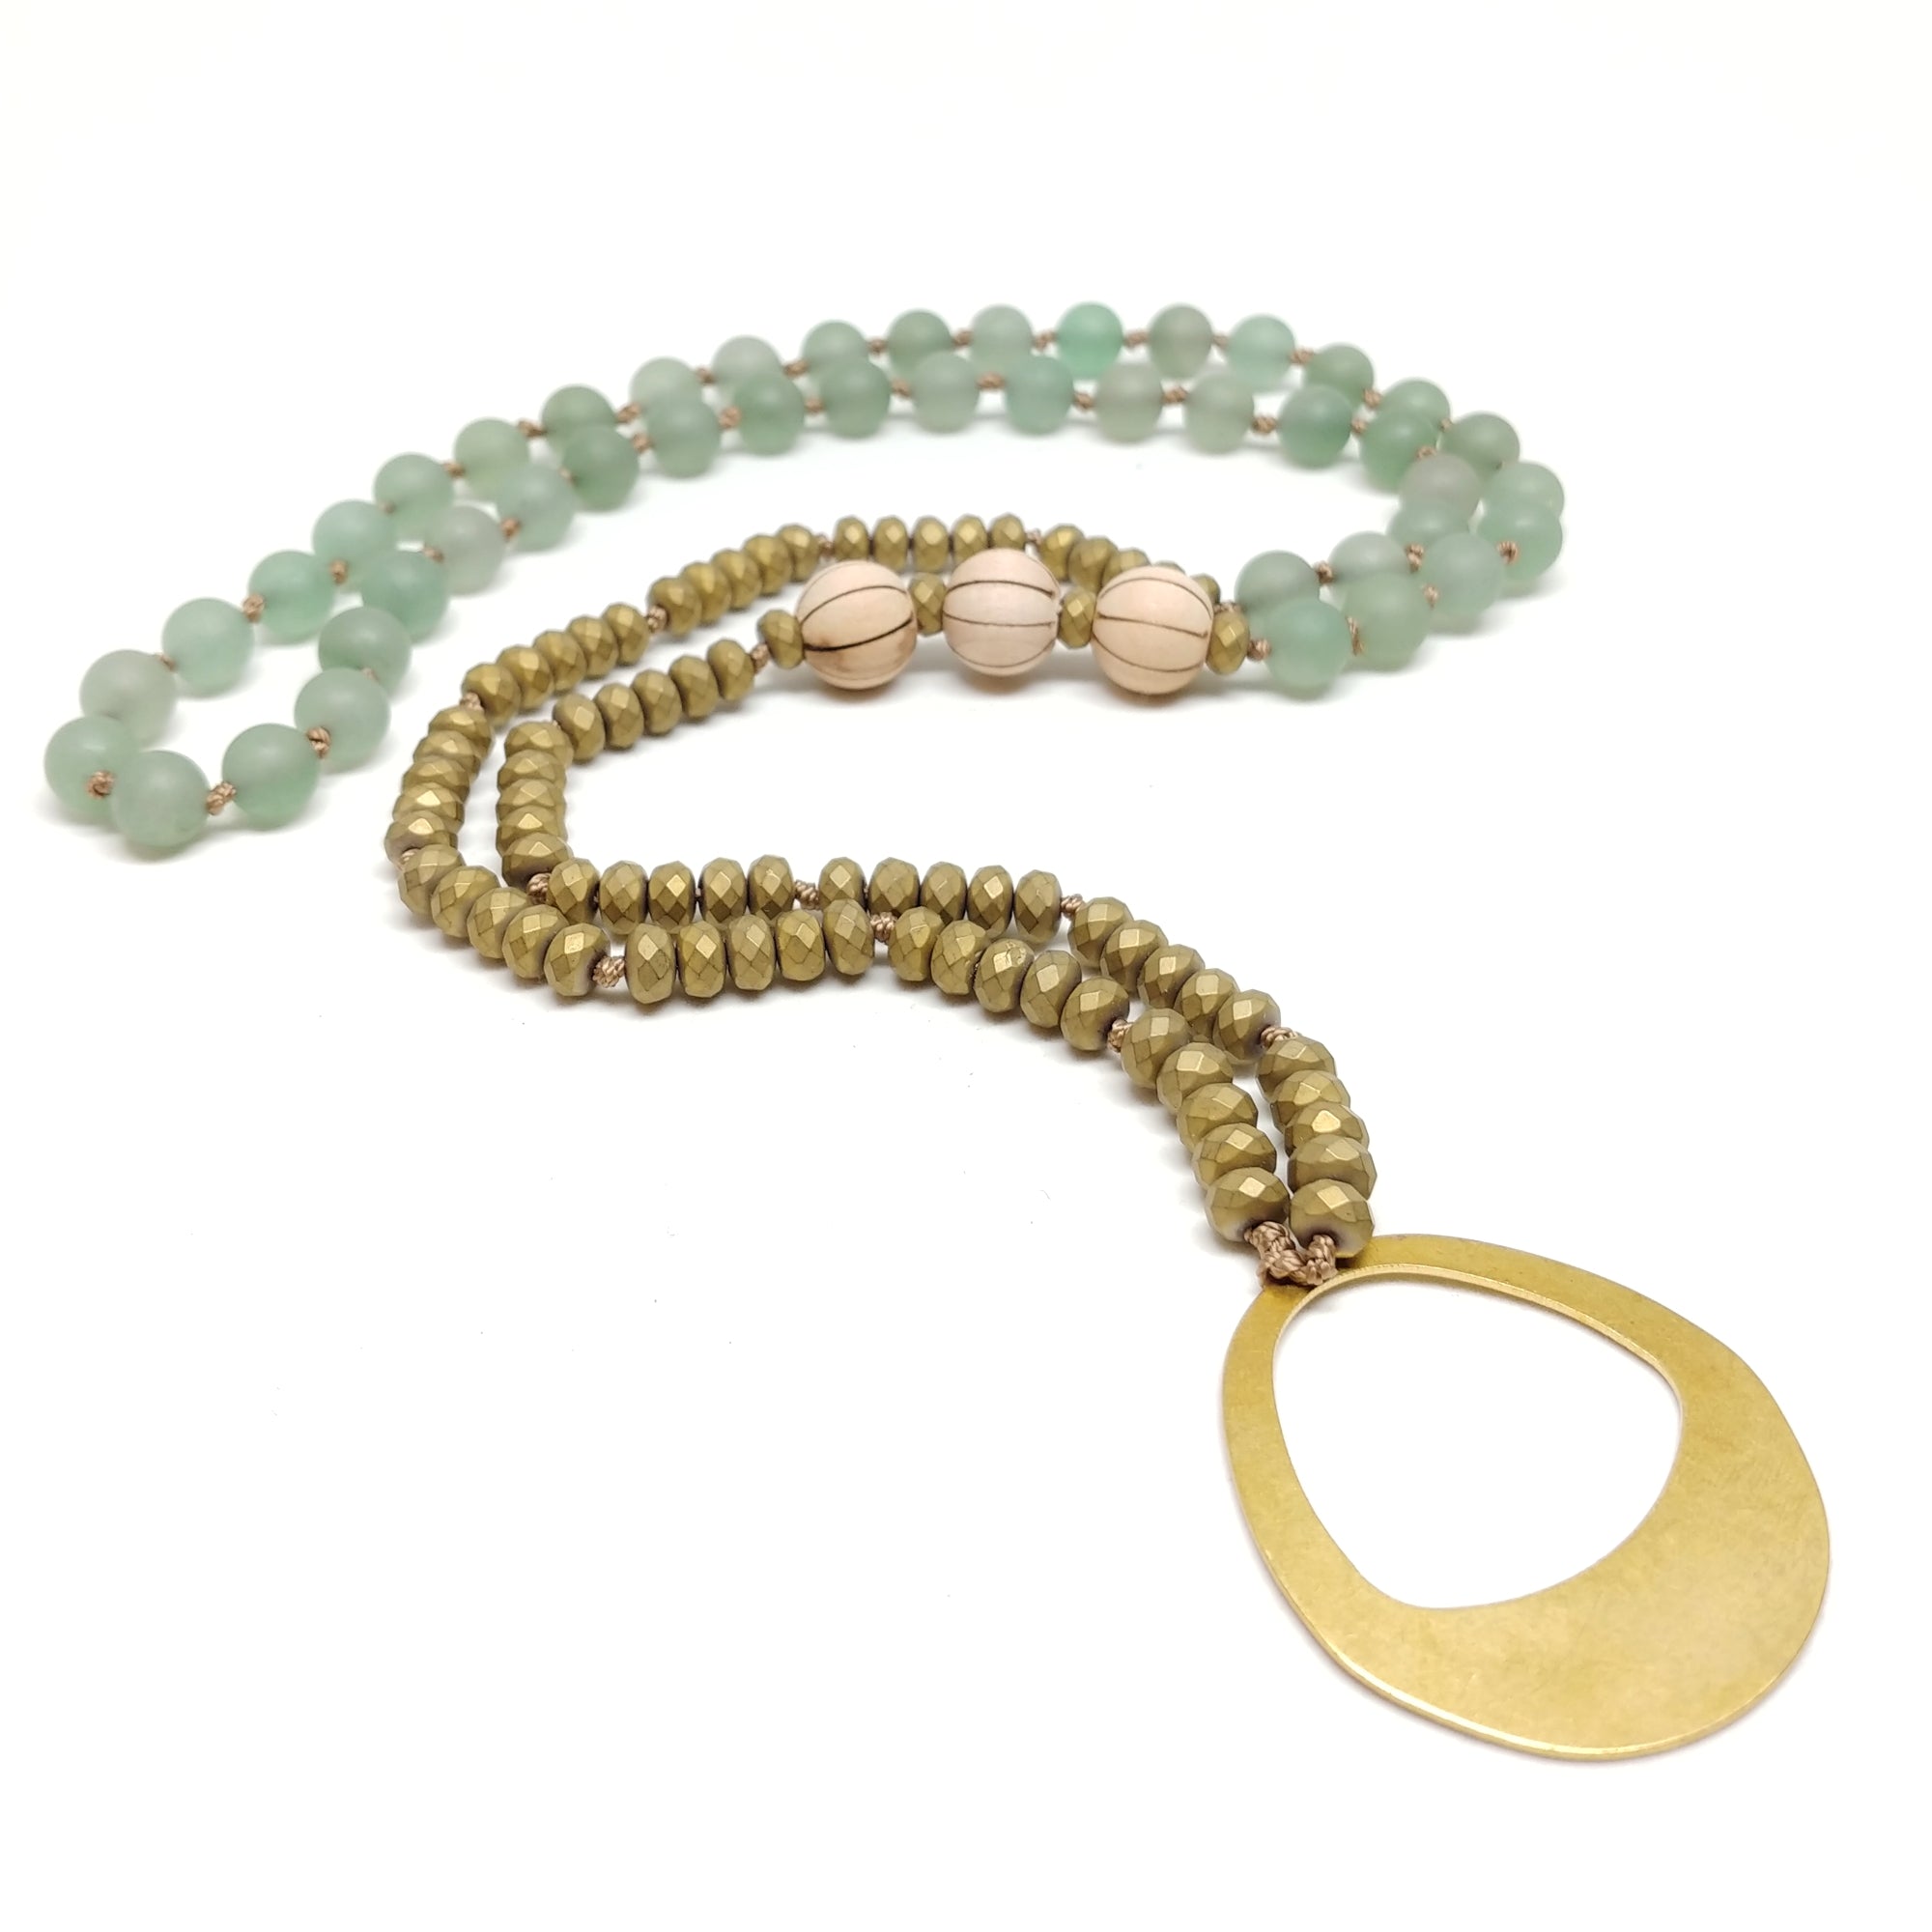 Palm Canyon Necklace, 33" mala-style knotted necklace, aventurine, hematite and sandal wood, brass oval pendant